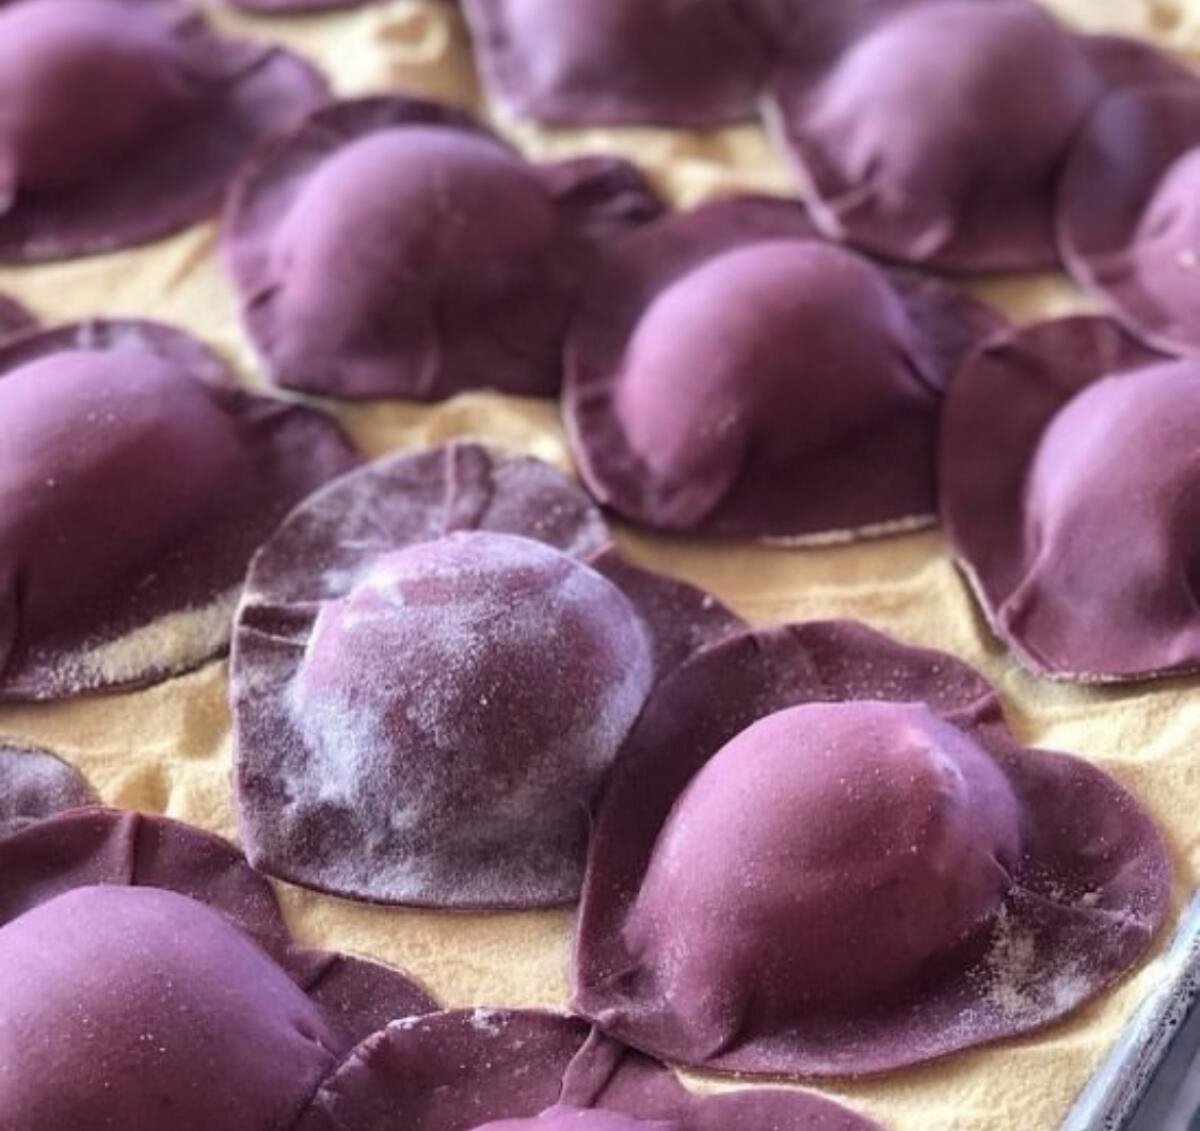 Terrace by Mix Mix offers heart-shaped ravioli for Valentine's Day with truffle and brown butter.